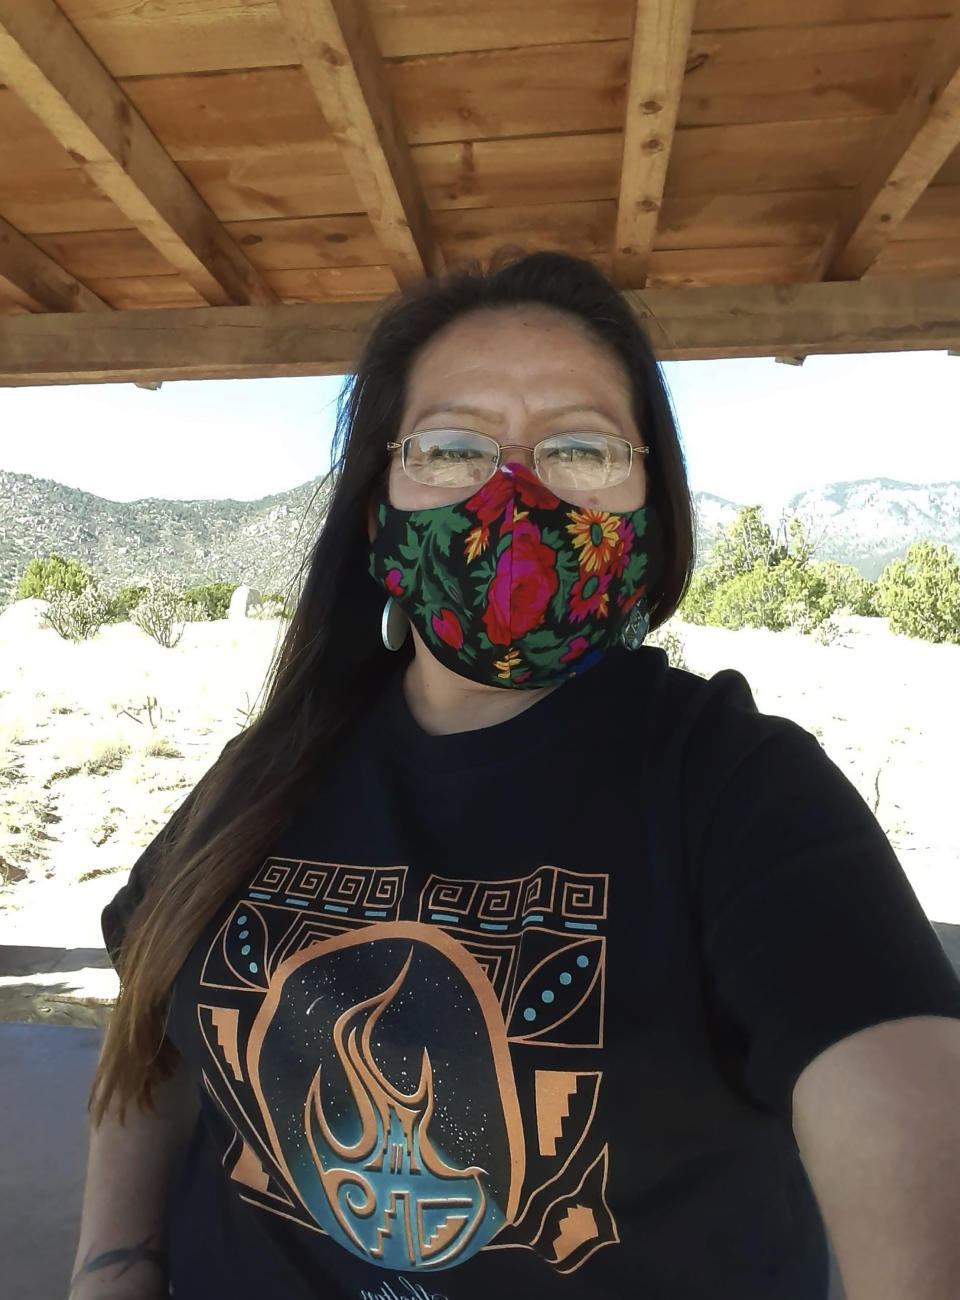 In this photo provided by Albertyn Pino, Pino poses for a selfie in Laguna Pueblo, N.M., Oct. 17, 2020. (Albertyn Pino via AP)